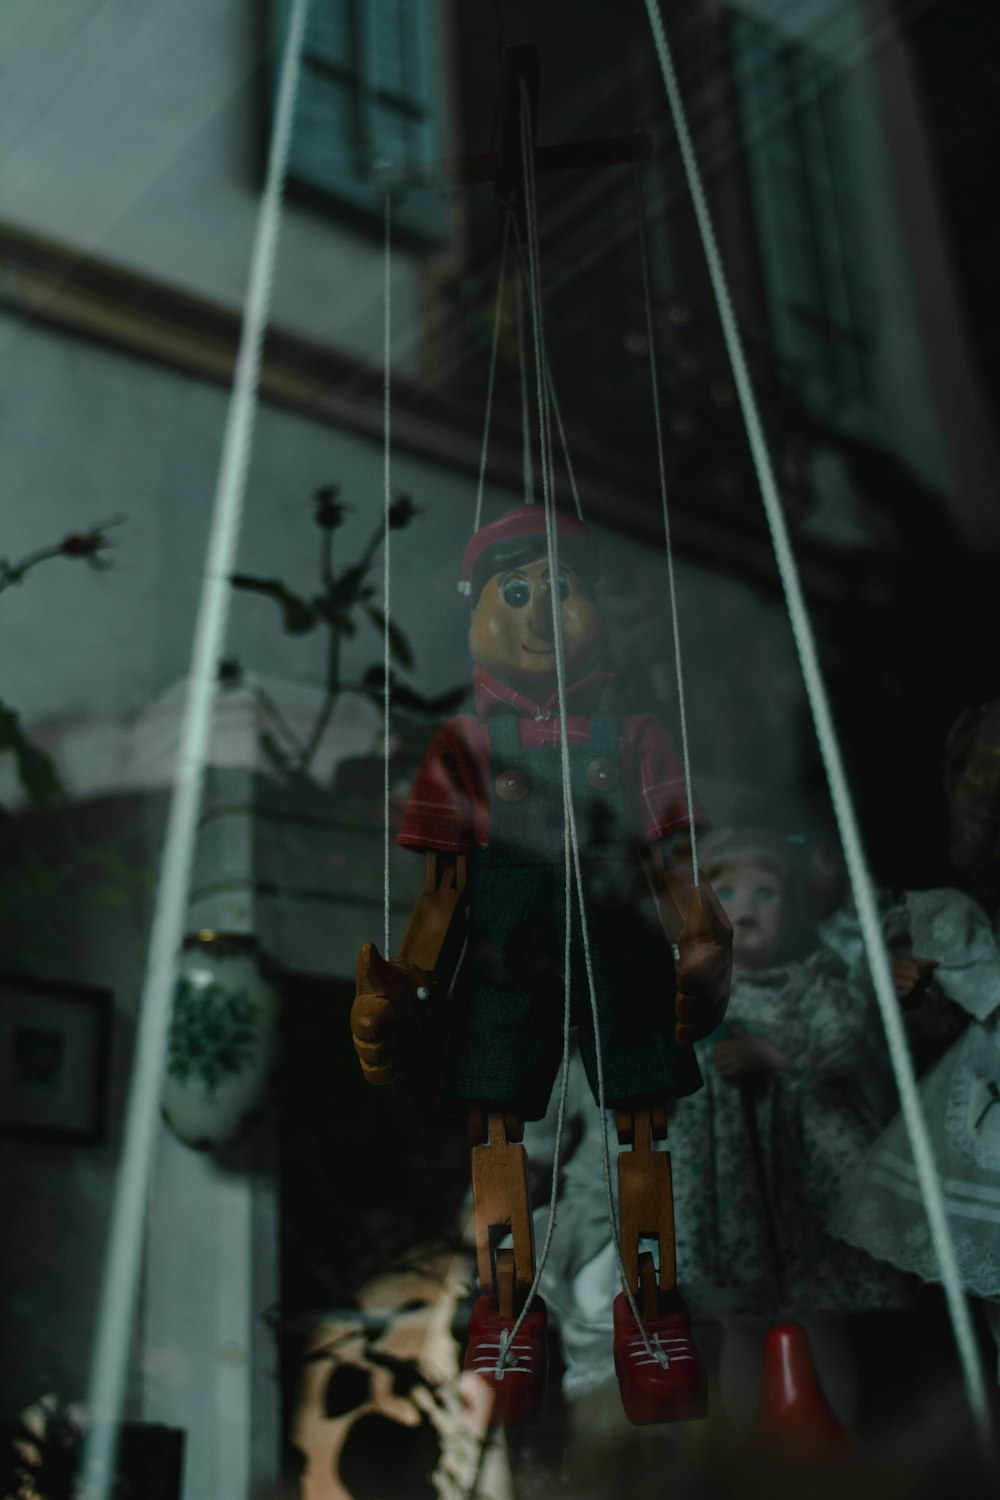 a doll hanging from a string in a window